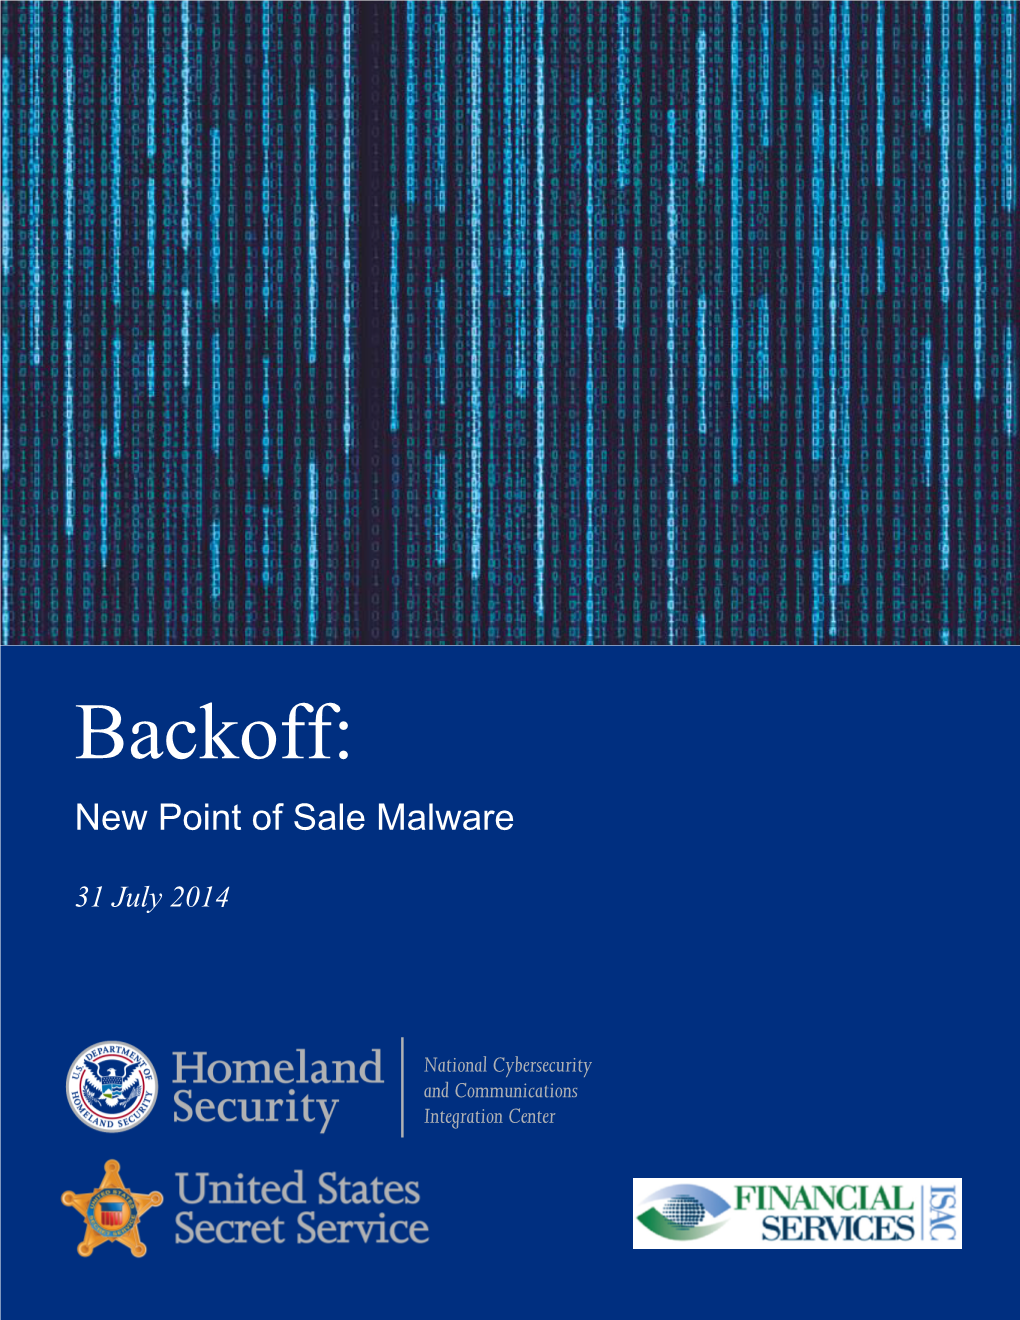 Backoff: New Point of Sale Malware